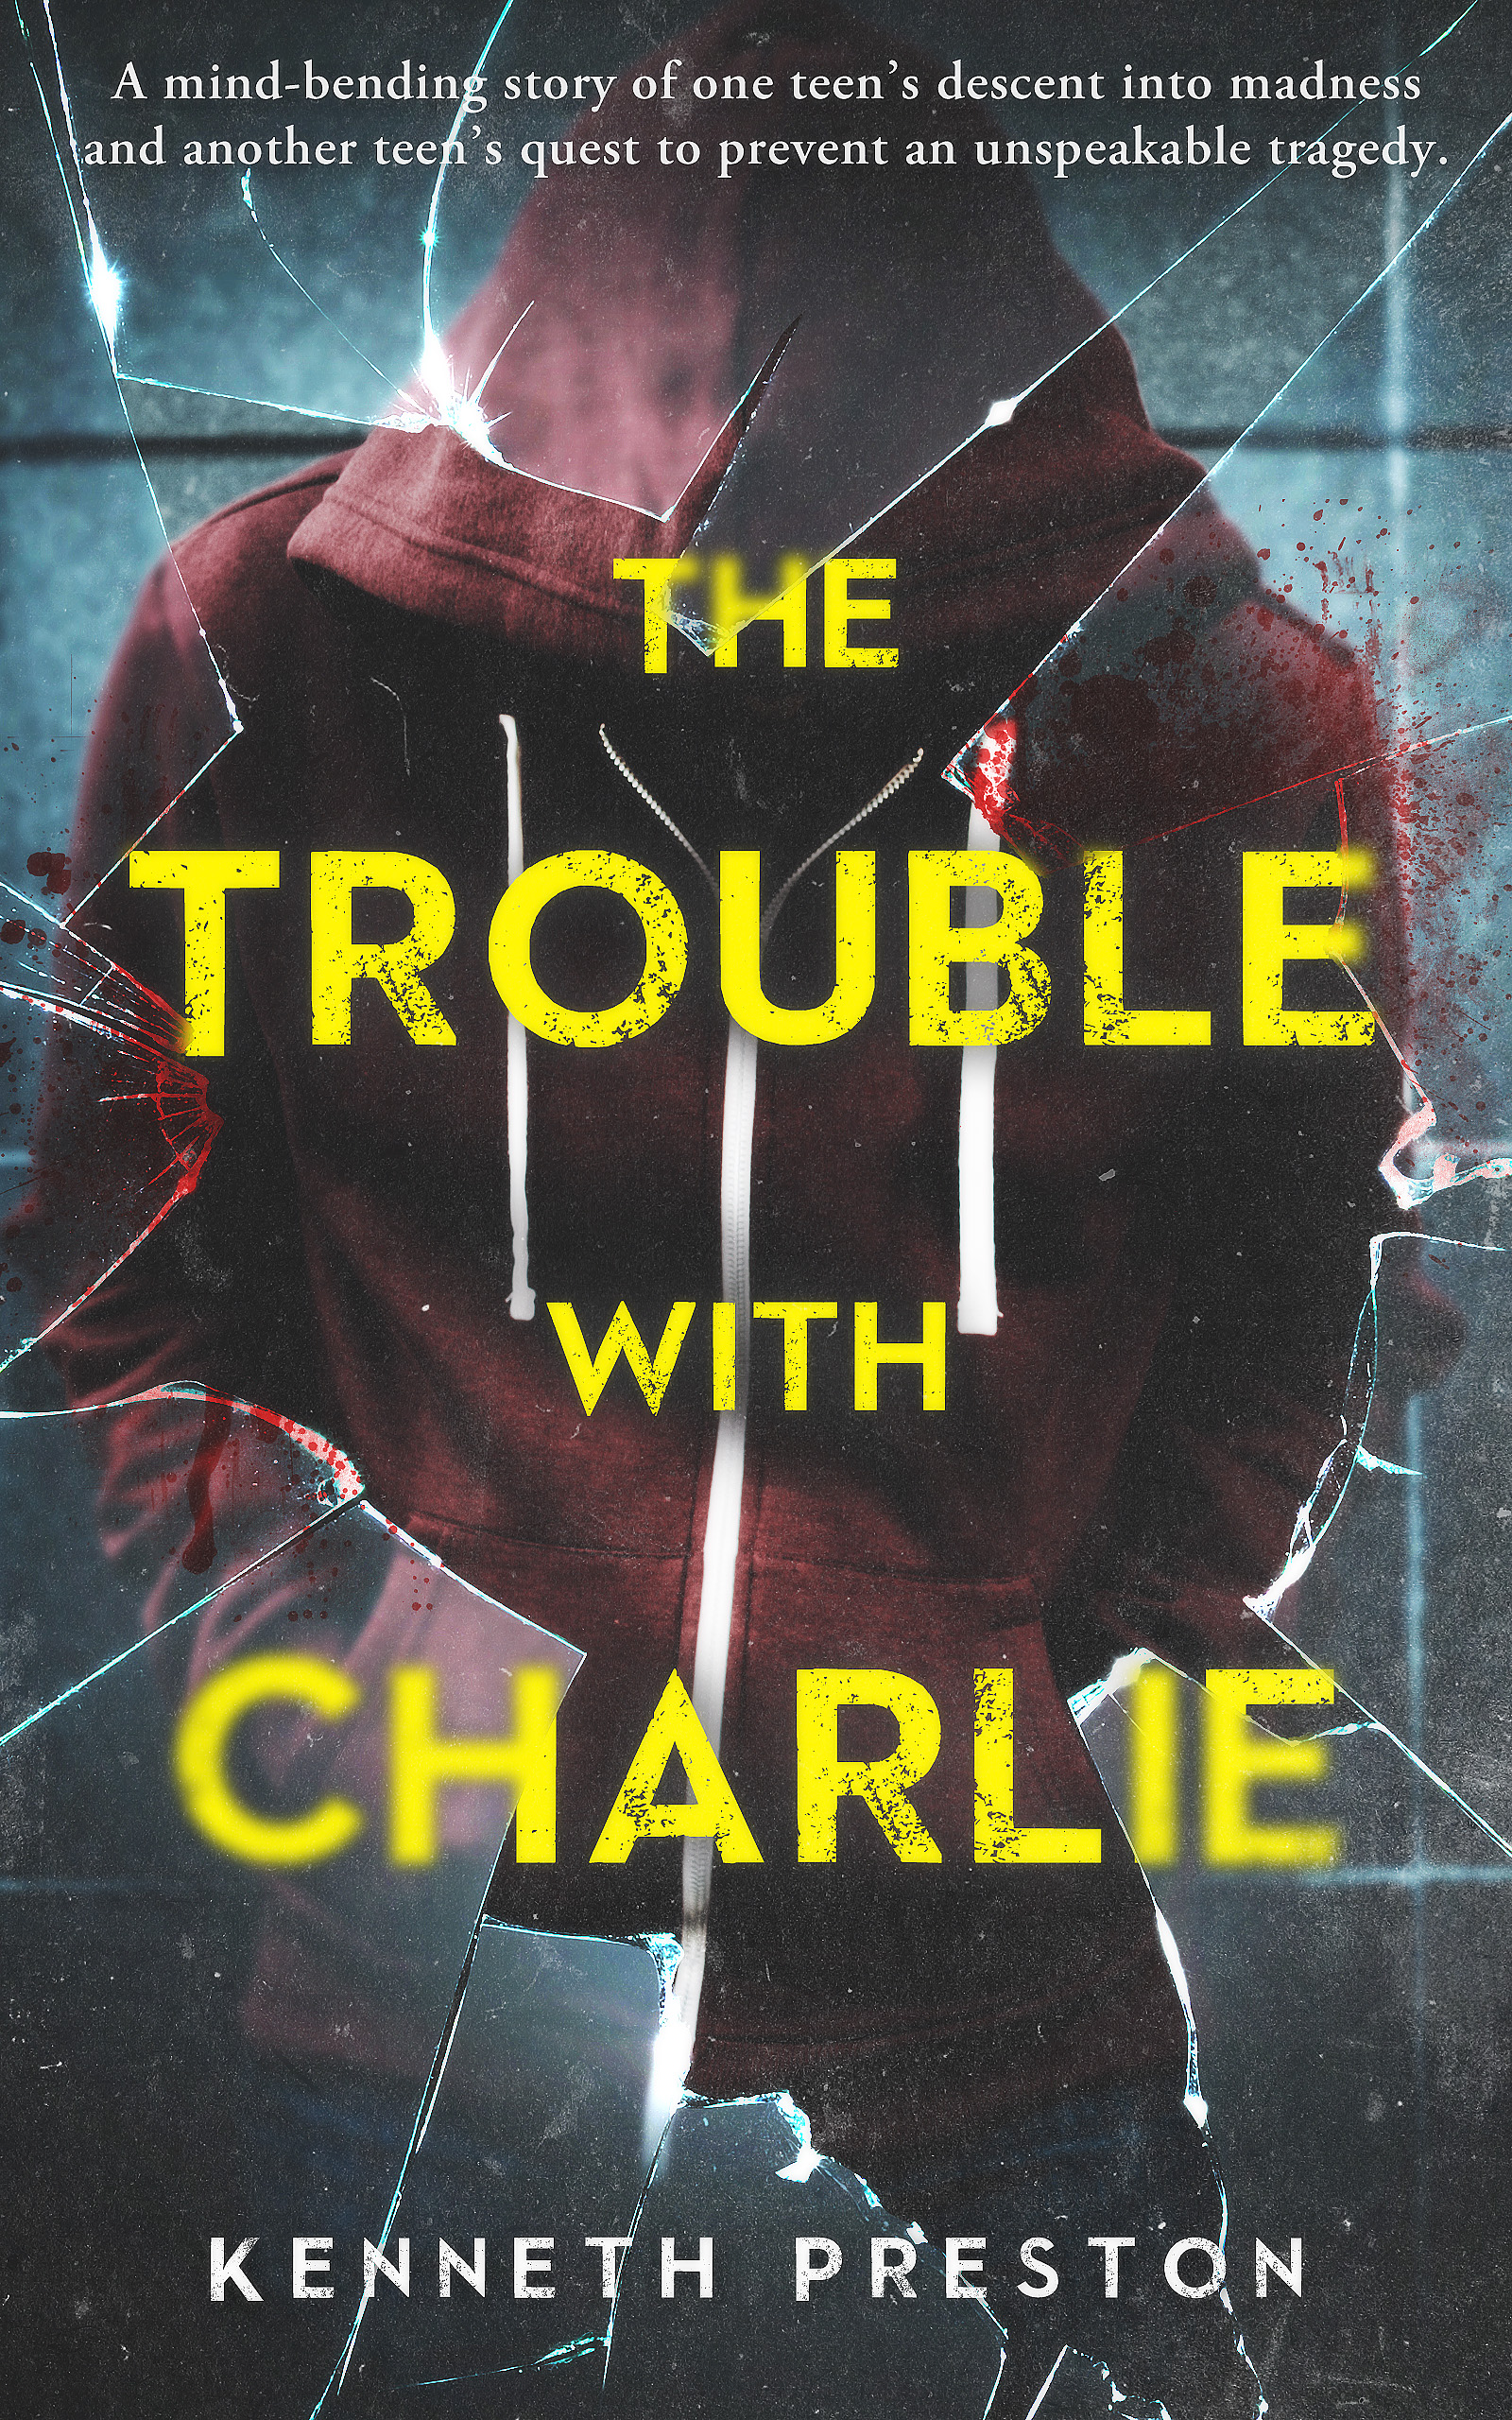 FREE: The Trouble With Charlie by Kenneth Preston